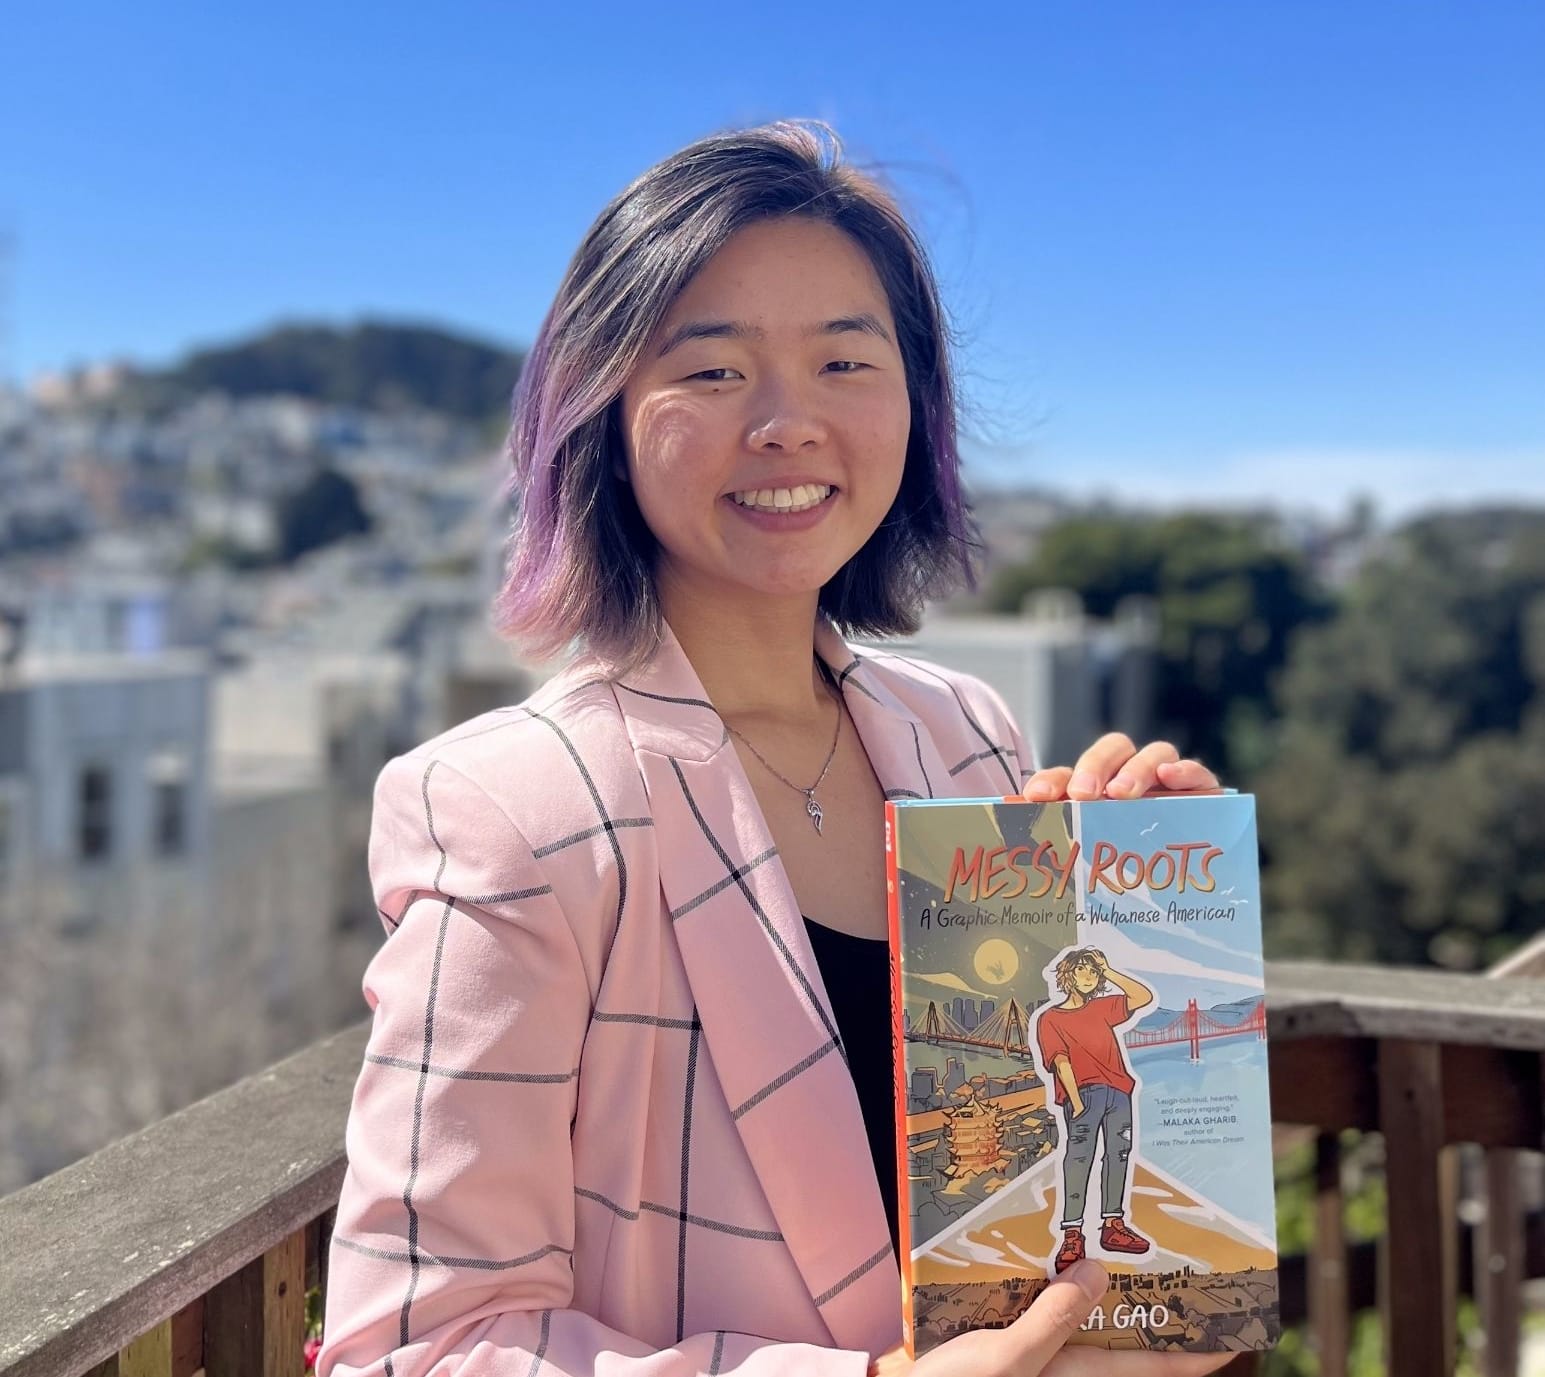 Laura Gao, author of the graphic Messy Roots, posing with the book.